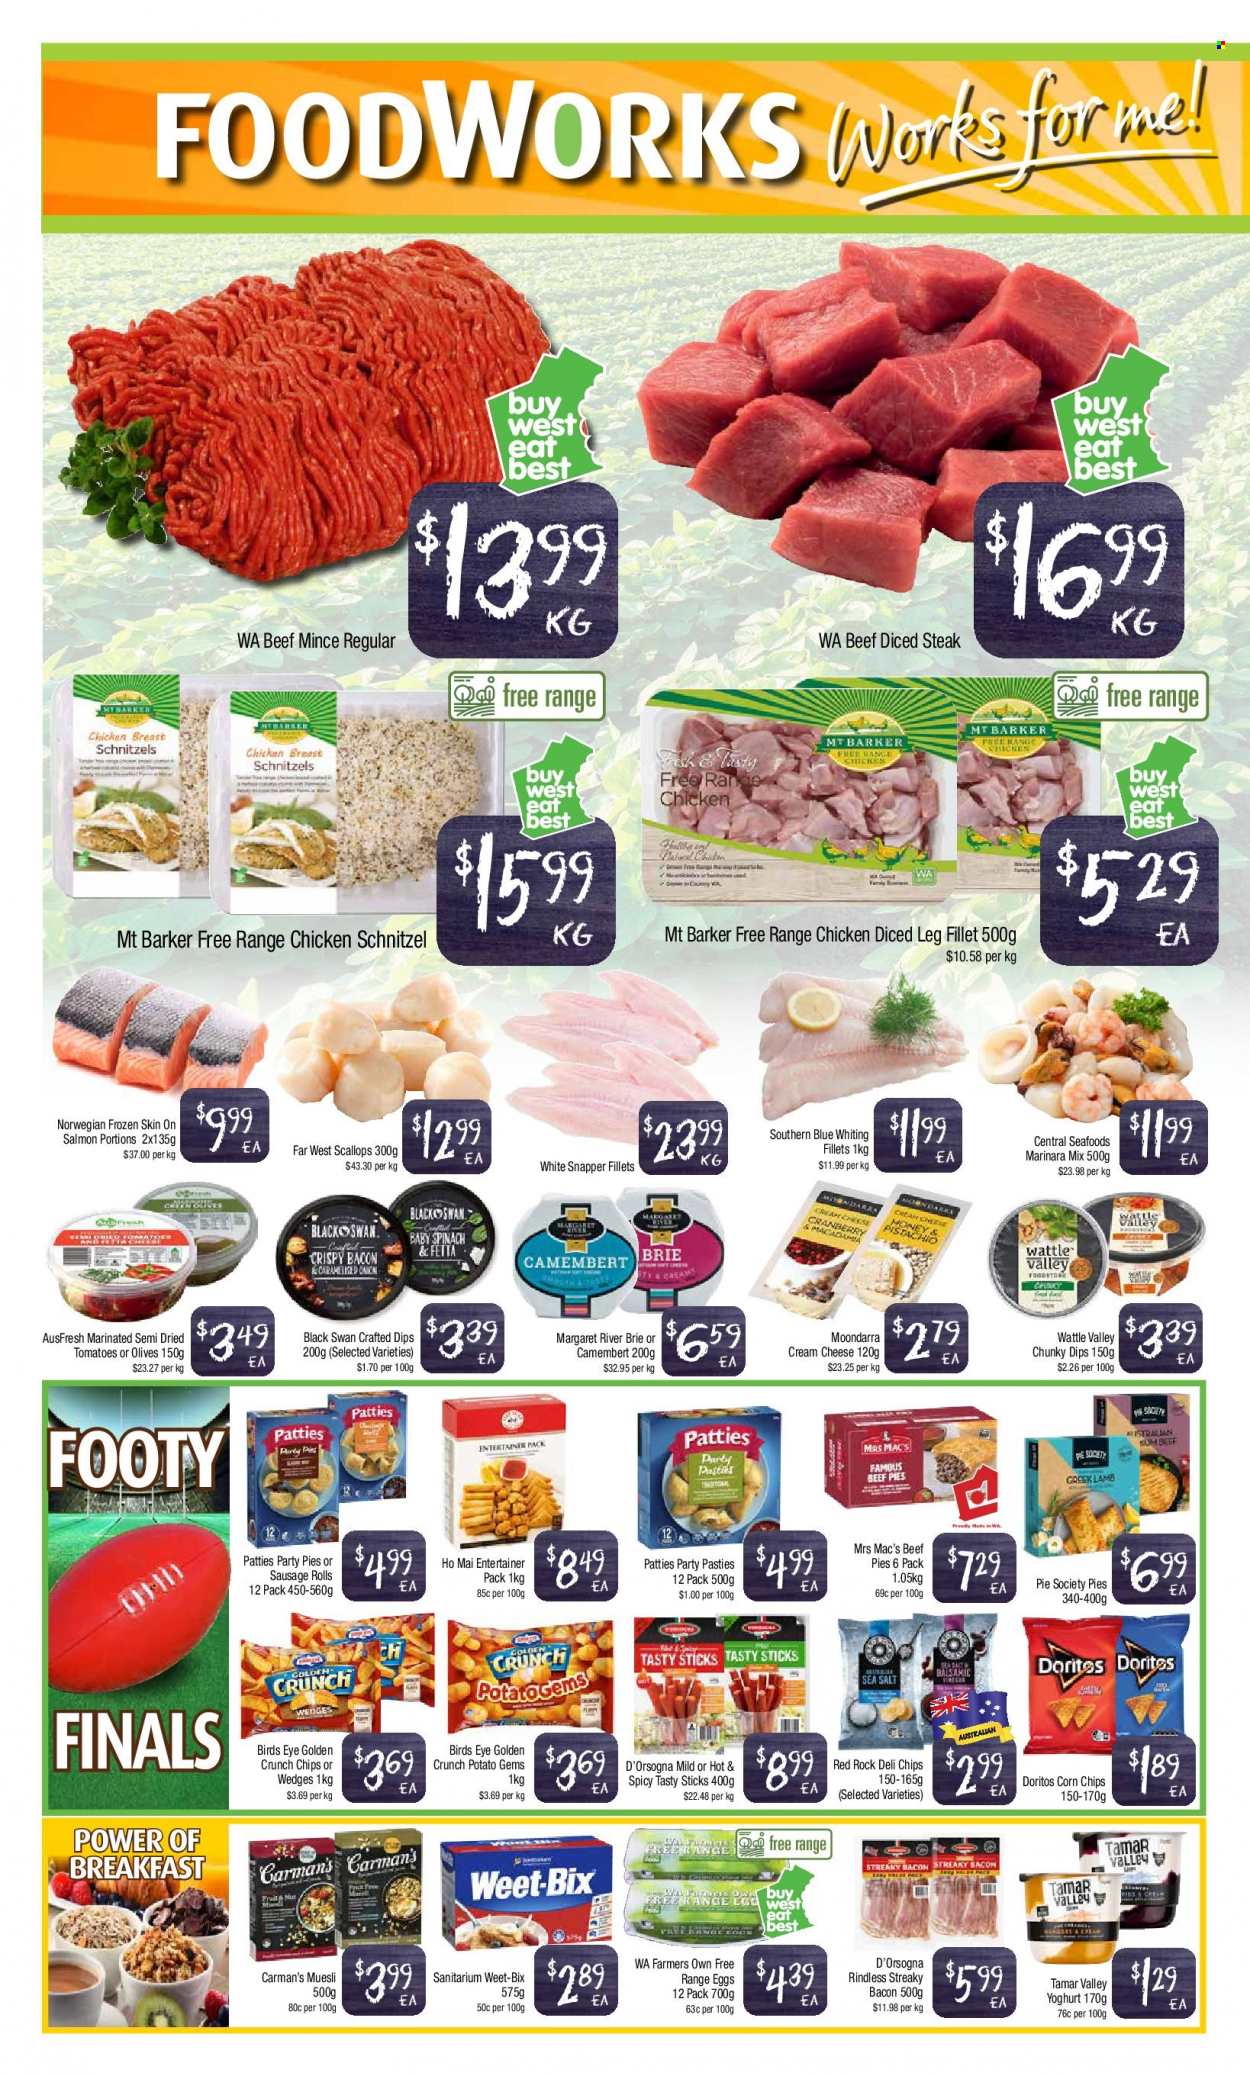 Foodworks catalogue - 15.9.2021 - 21.9.2021.